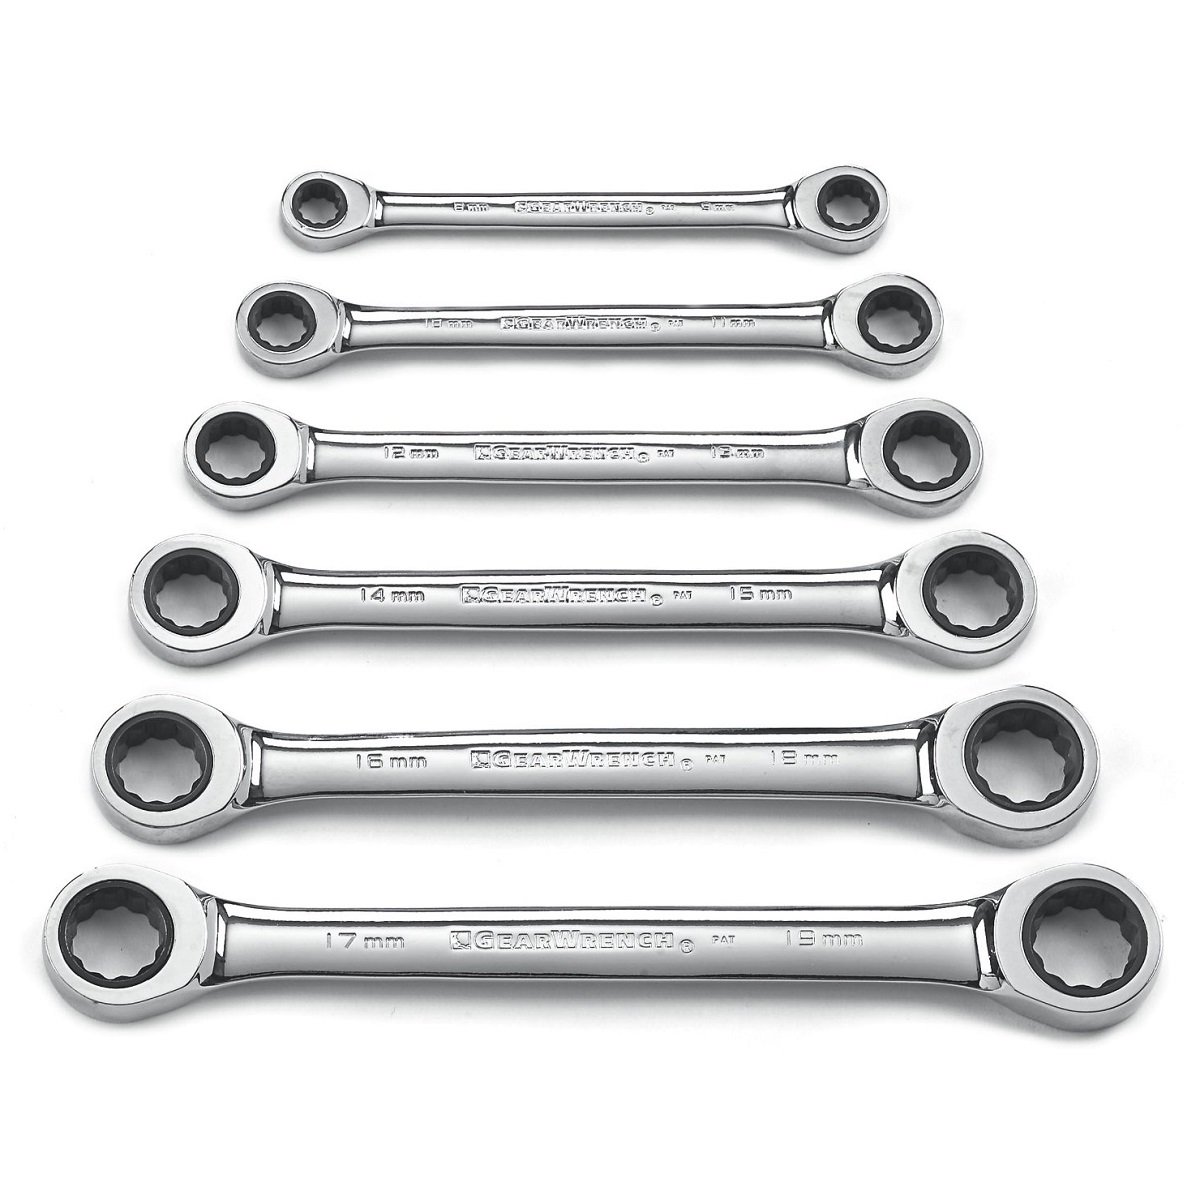 GearWrench 6 Piece Double Box Ratcheting Wrench Spanner Set Metric 9260